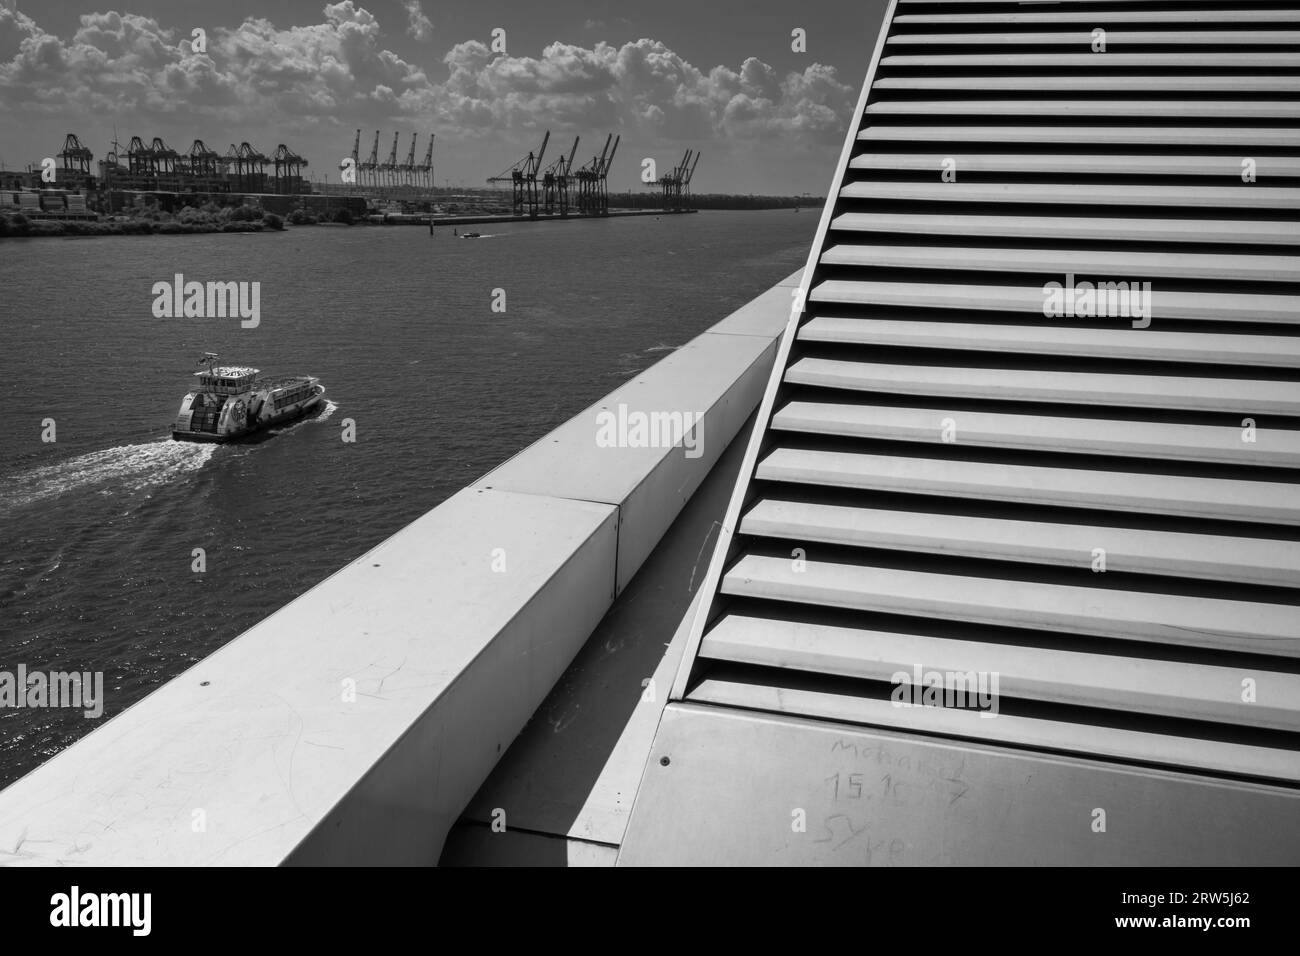 Hamburg, Germany - June 17 2023: River Elbe Landscape with Harbour Cranes, Dockland Building and Ferry Boat in Monochrome Black and White Stock Photo